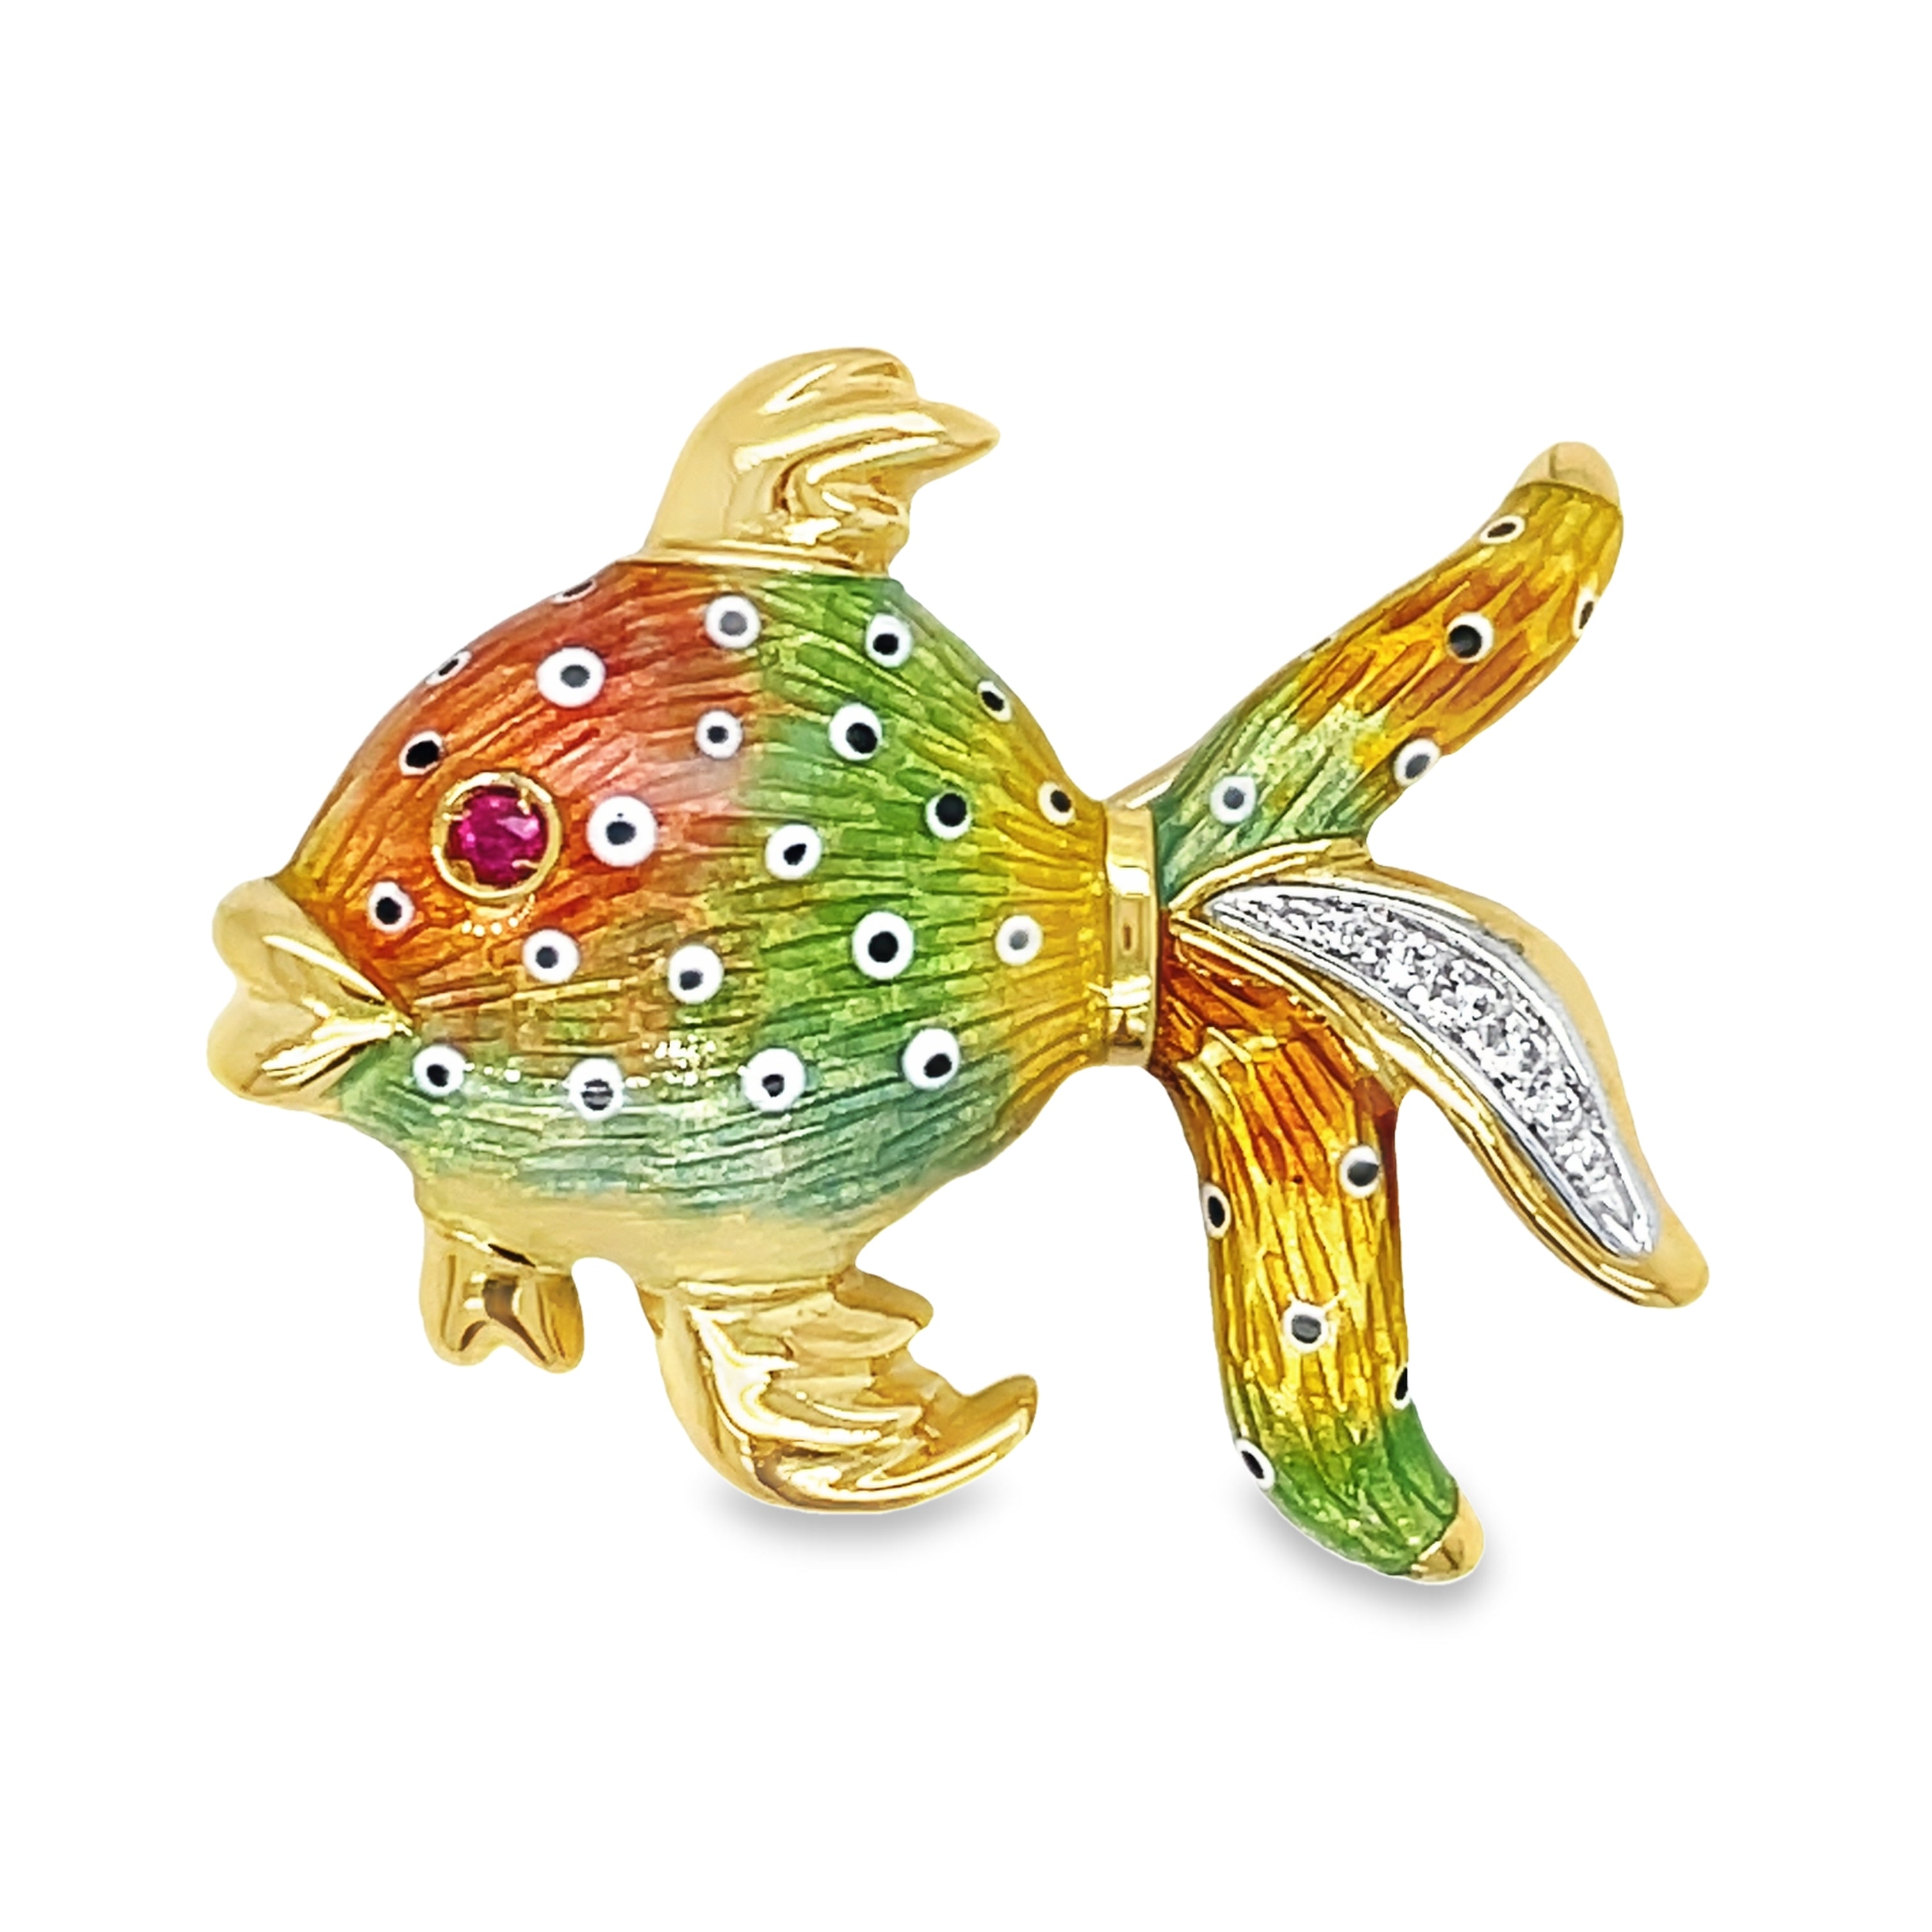 "Add a touch of elegance to any outfit with our Italian Made Enamel & Diamond Fish Brooch! Handcrafted with 18k Italian yellow gold and a sparkling round diamond, this versatile piece can be worn as a brooch or pendant. With its beautiful hand-painted enamel colors, it's sure to catch the eye. Perfect for any occasion!"